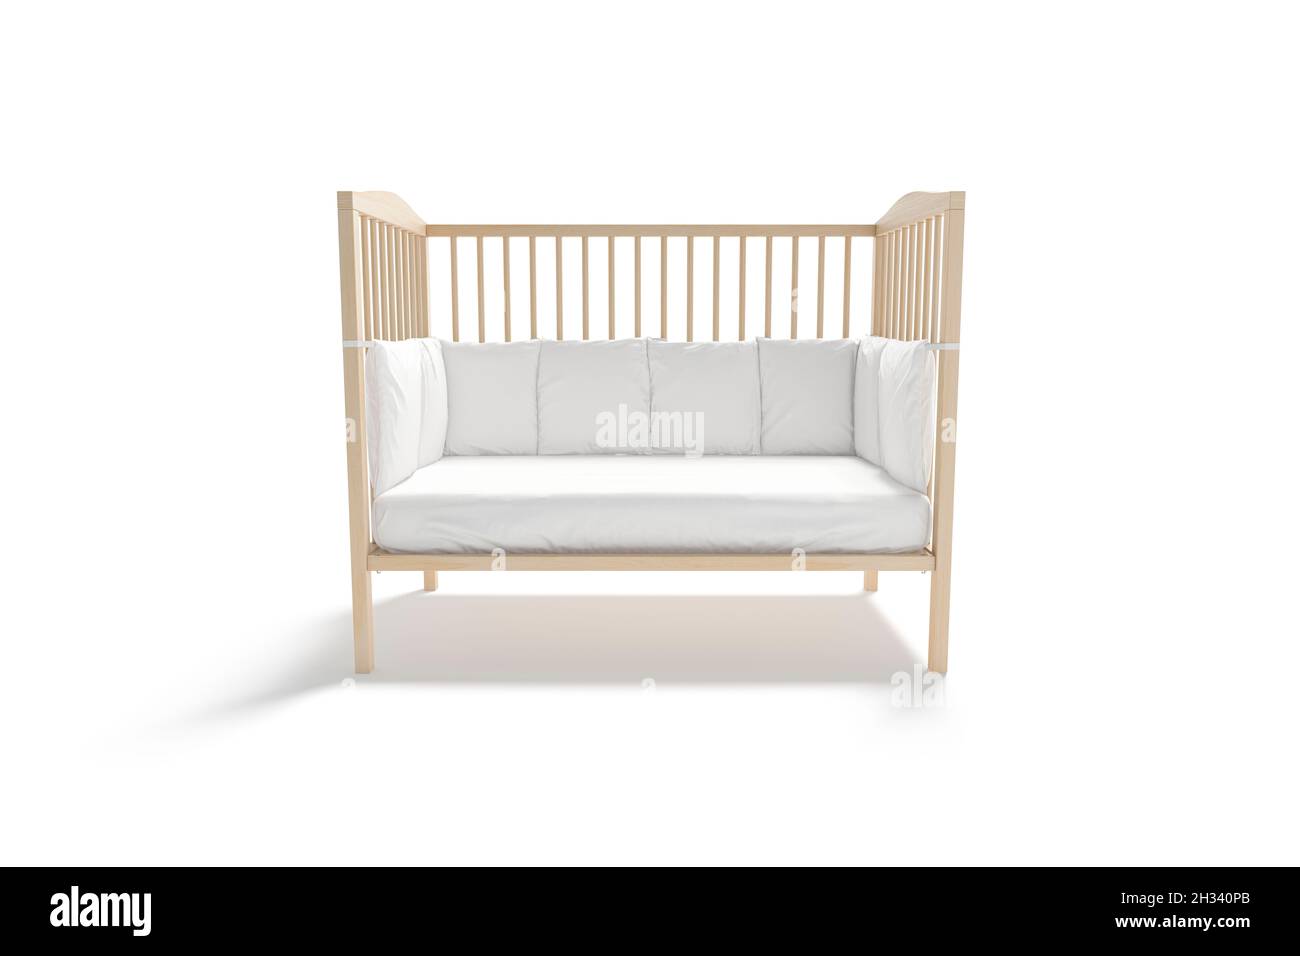 Blank wood cot with white crib sheet, protective bumpers mockup Stock Photo